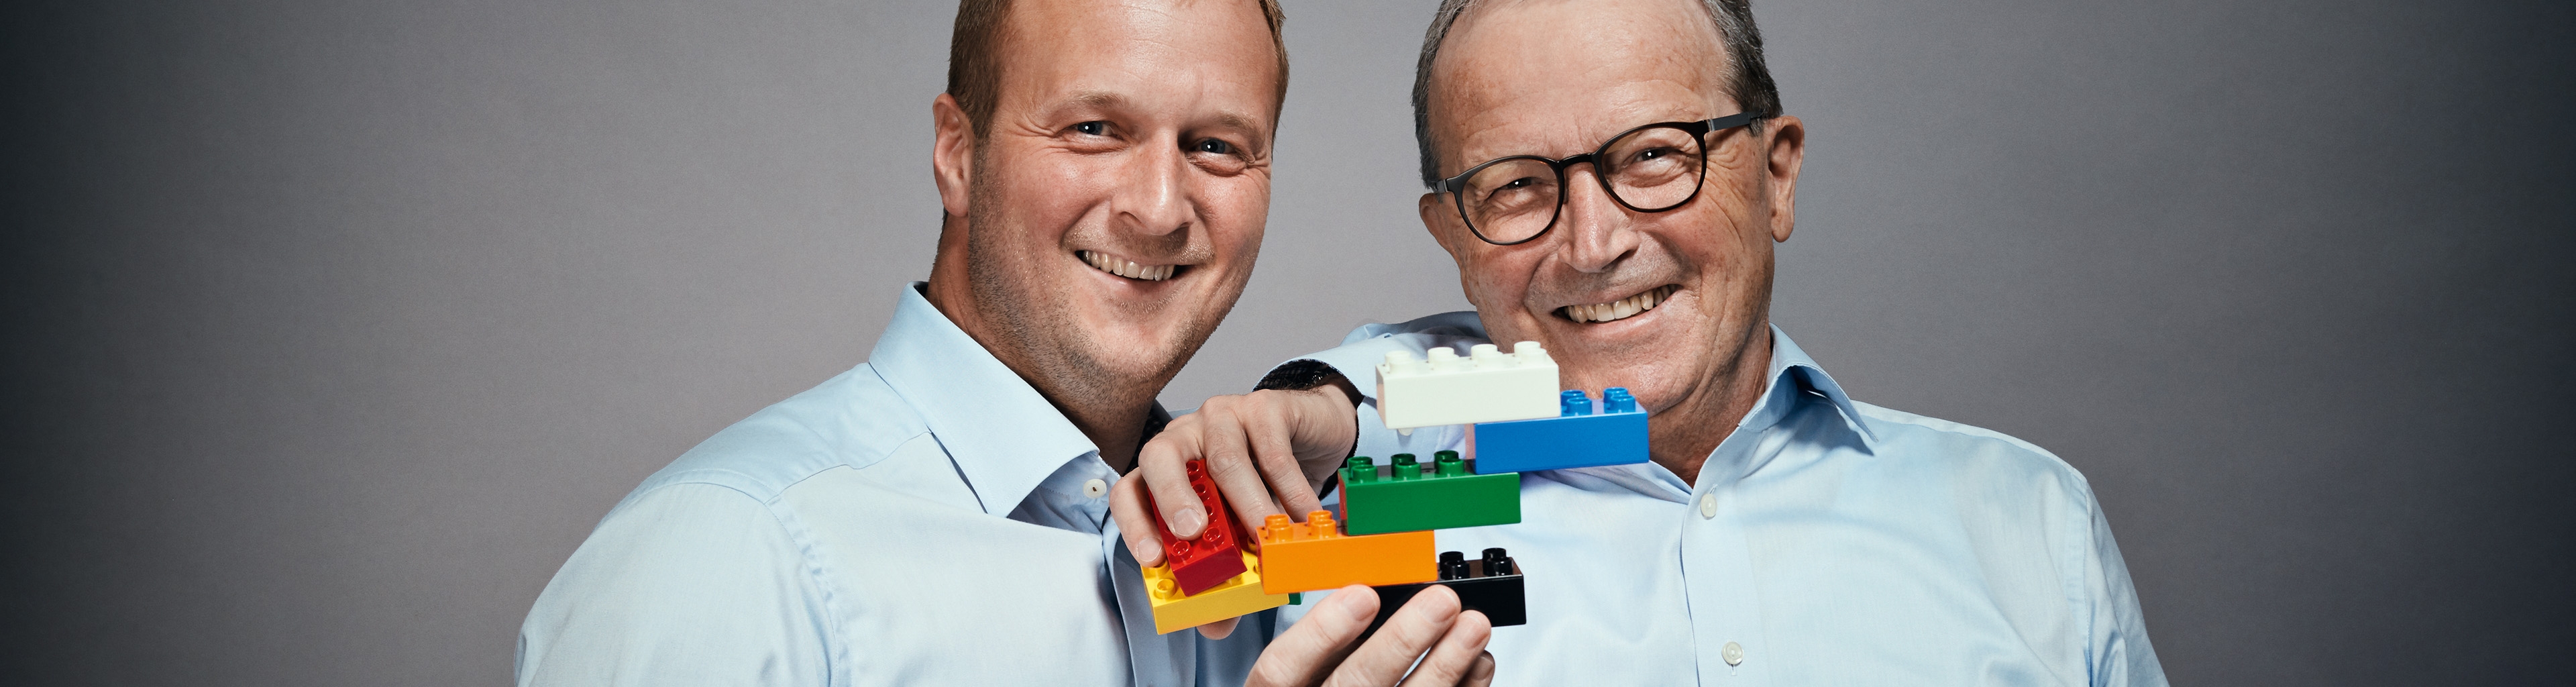 Ownership - The LEGO Group - About us 